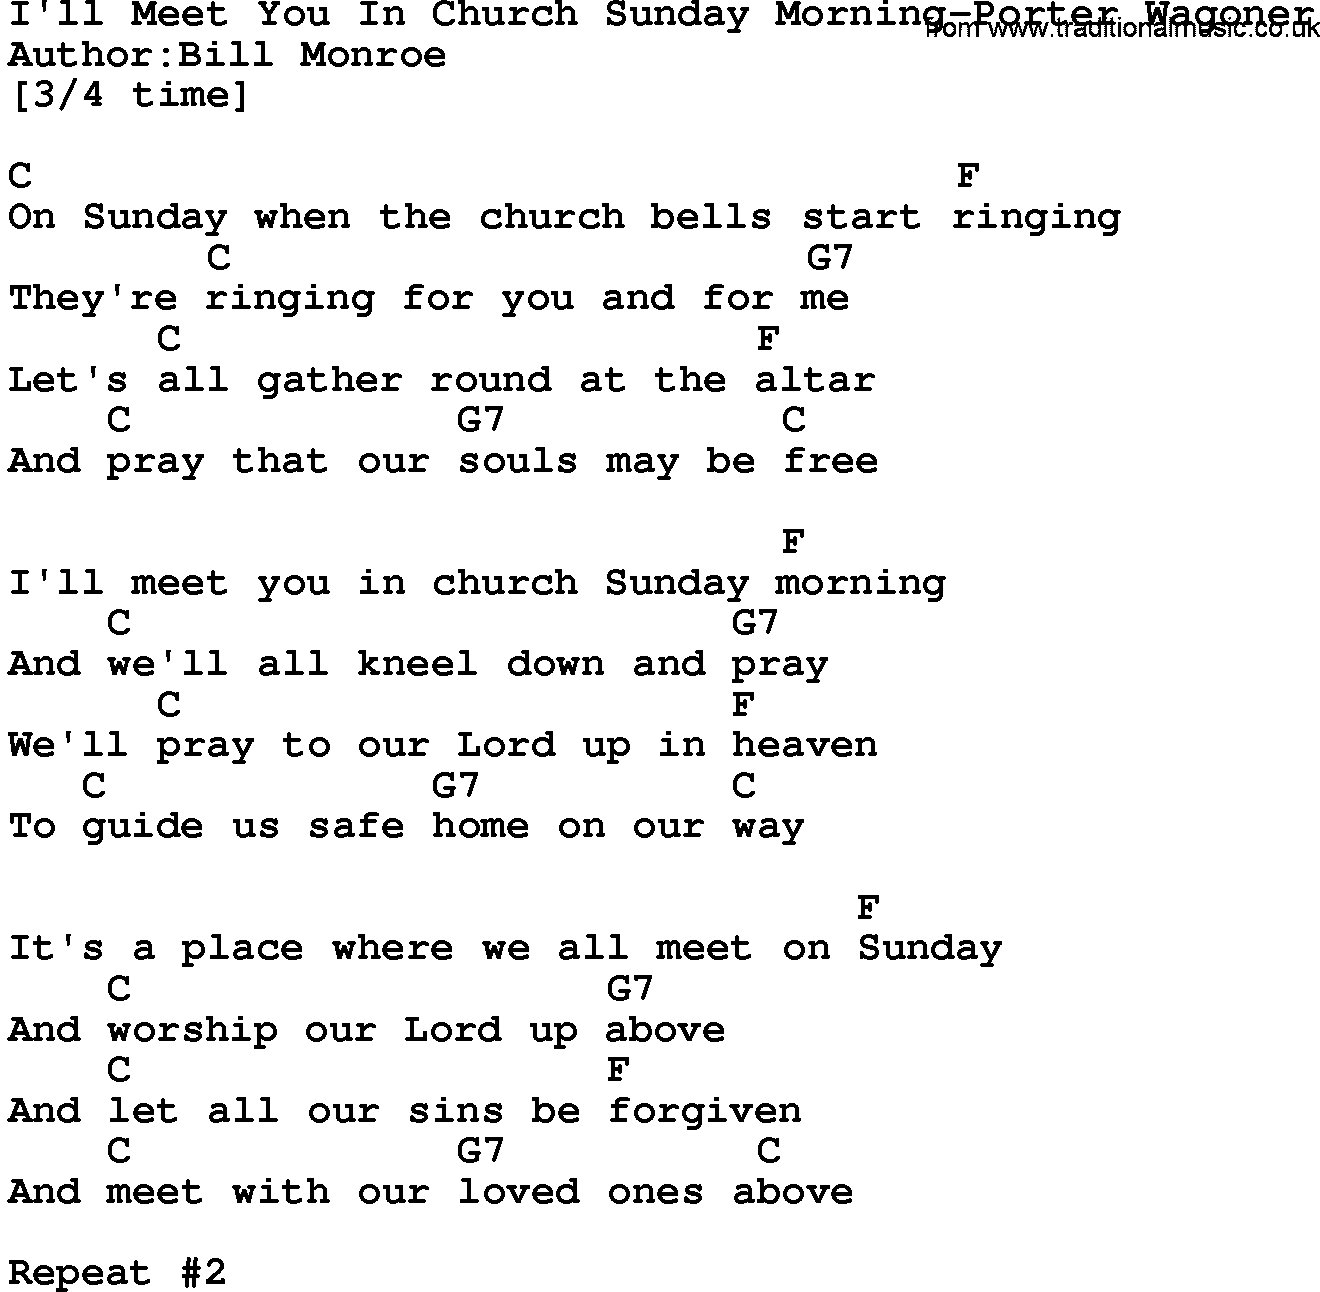 Country music song: I'll Meet You In Church Sunday Morning-Porter Wagoner lyrics and chords